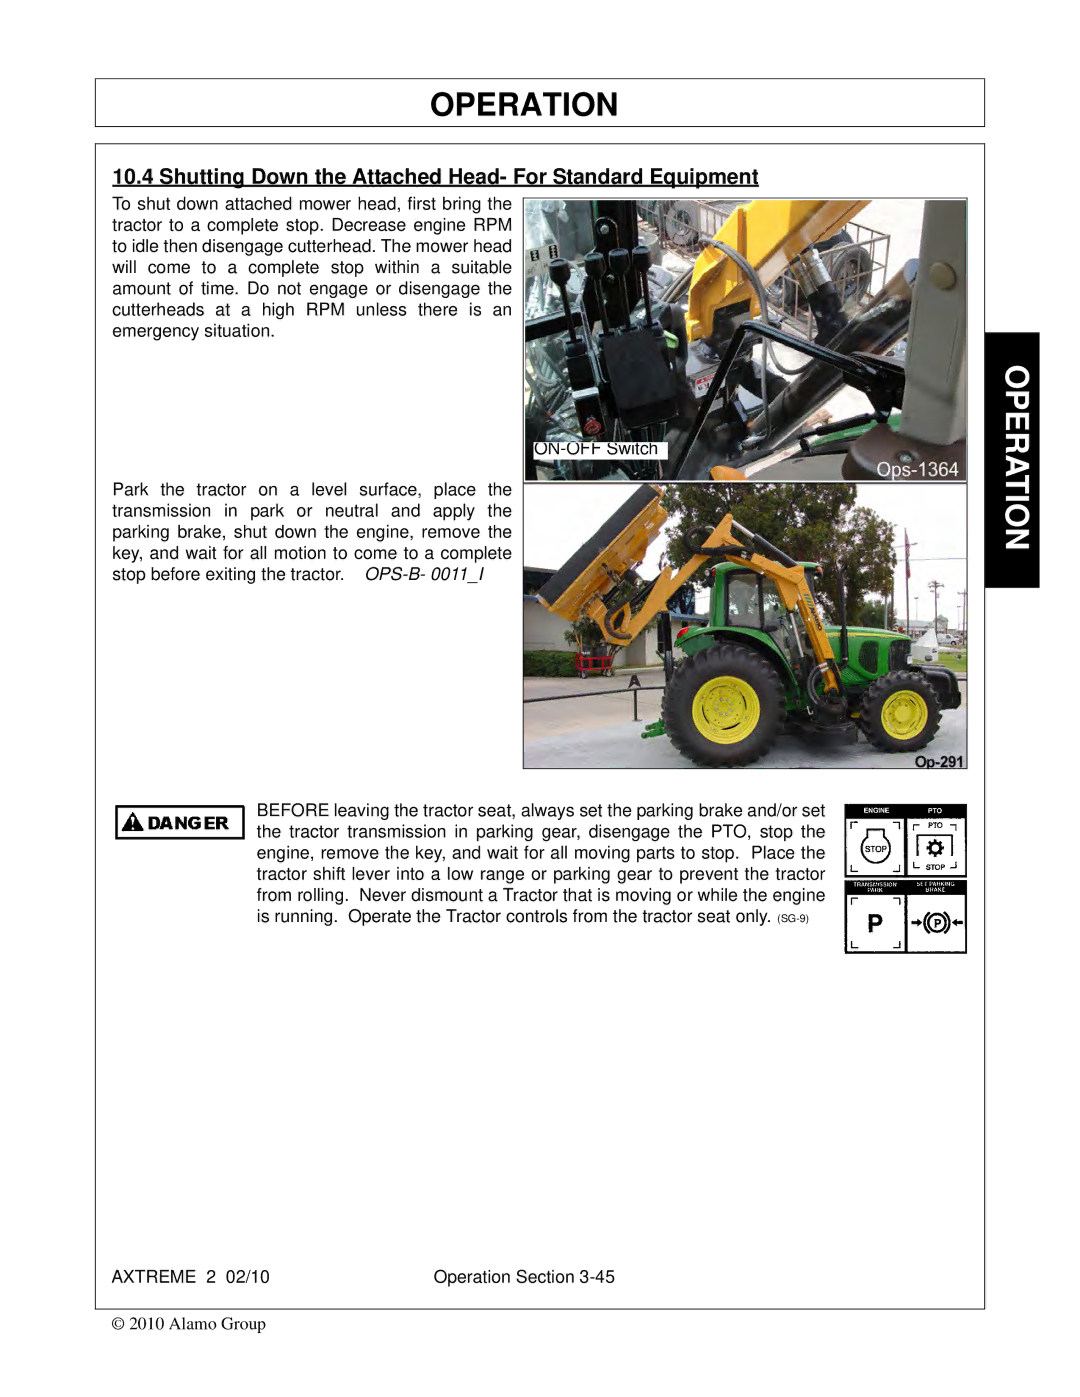 Alamo Lawn Mower manual Shutting Down the Attached Head- For Standard Equipment 